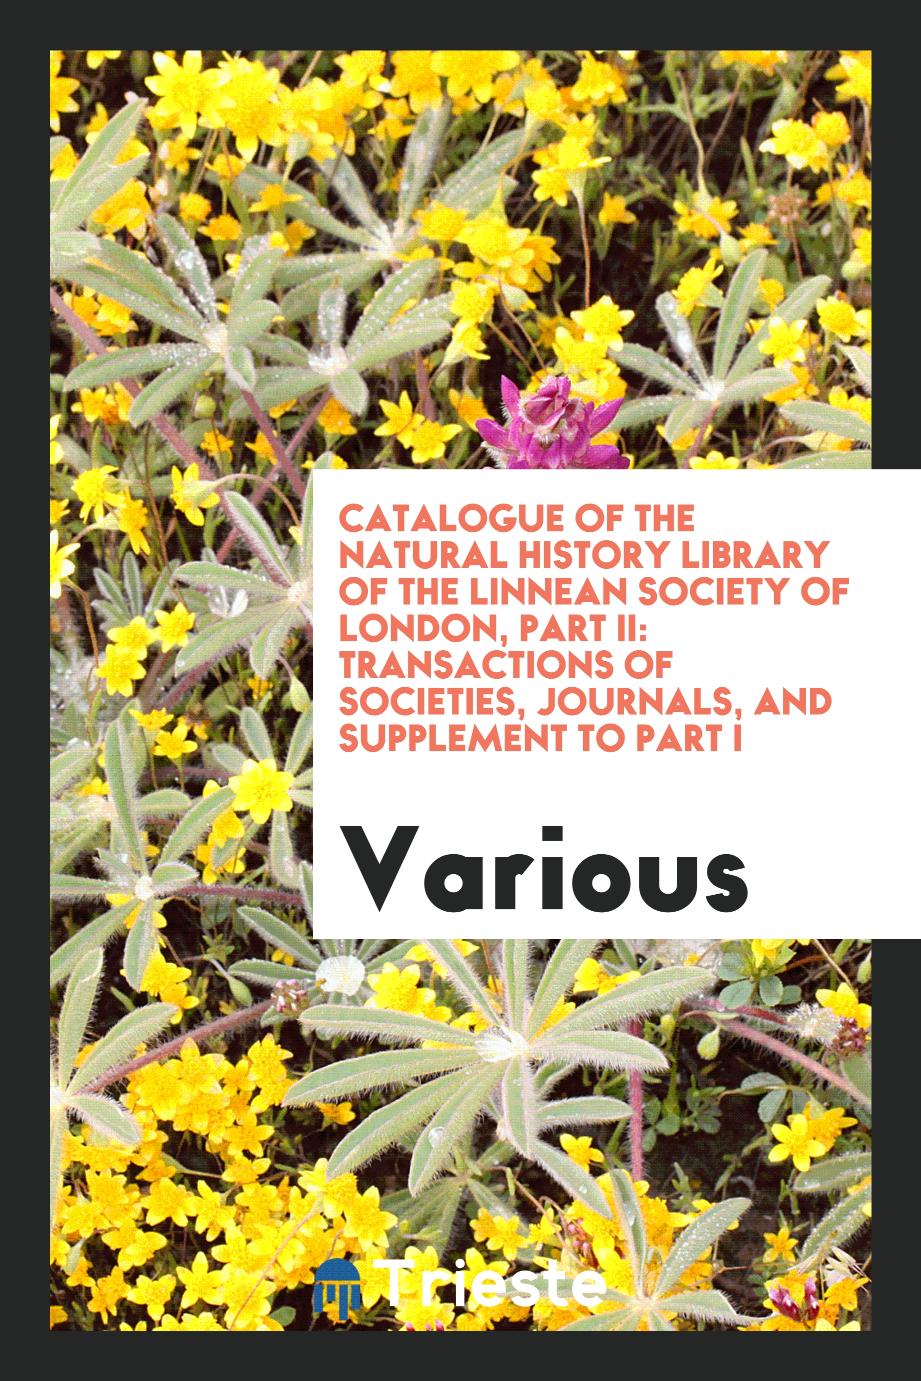 Catalogue of the Natural History Library of the Linnean Society of London, Part II: Transactions of Societies, Journals, and Supplement to Part I